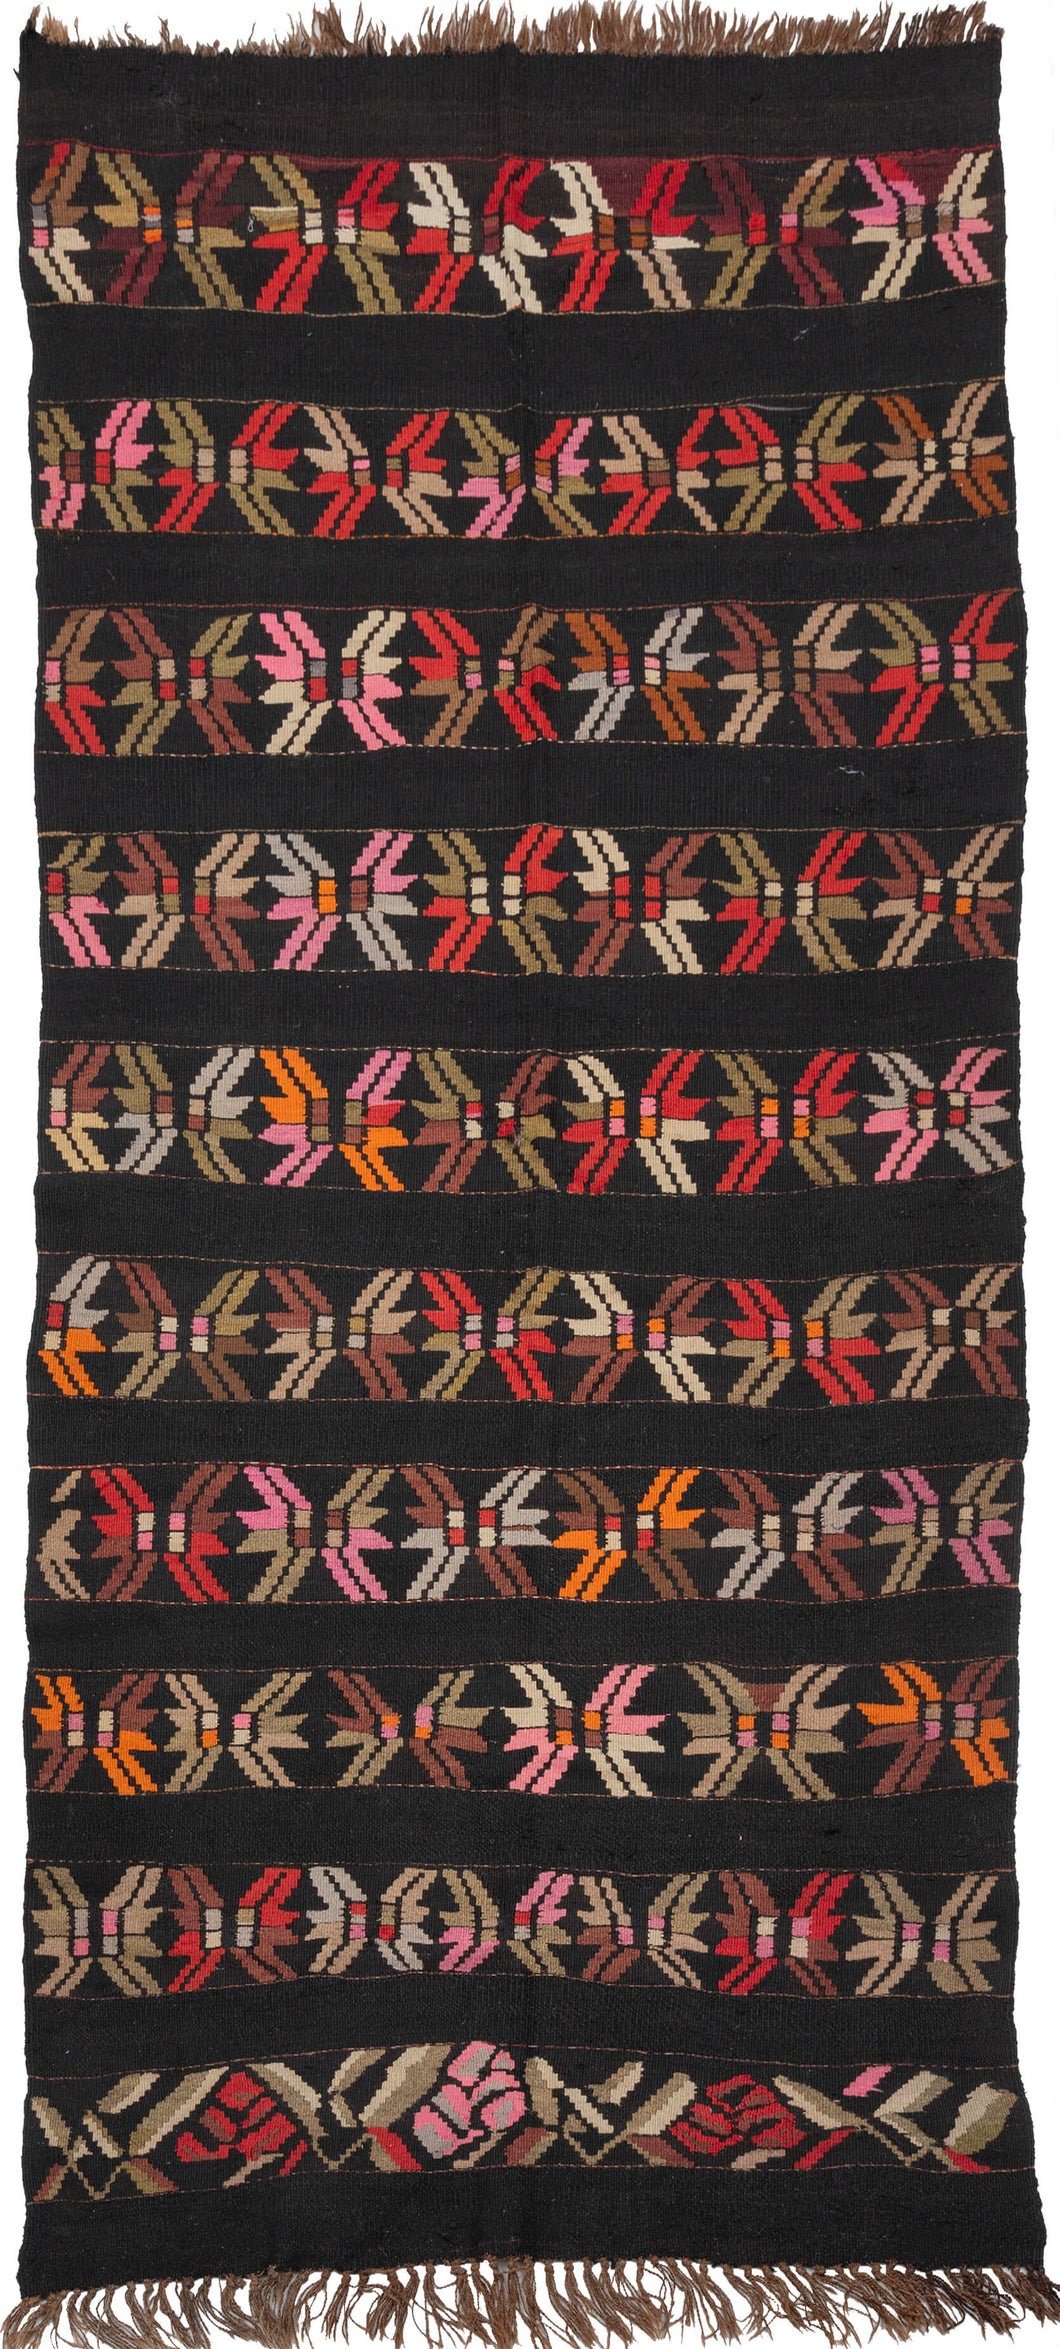 This Karabaugh kilim features horizontal row of stars or abstracted flowers in light and dark brown, soft greens, slate and vibrant red and orange on a black ground. The pattern is simple but interesting and can be read multiple depending on what the viewer focuses on. Woven of hearty handspun with the undyed brown warps adding an additional aesthetic dimension.